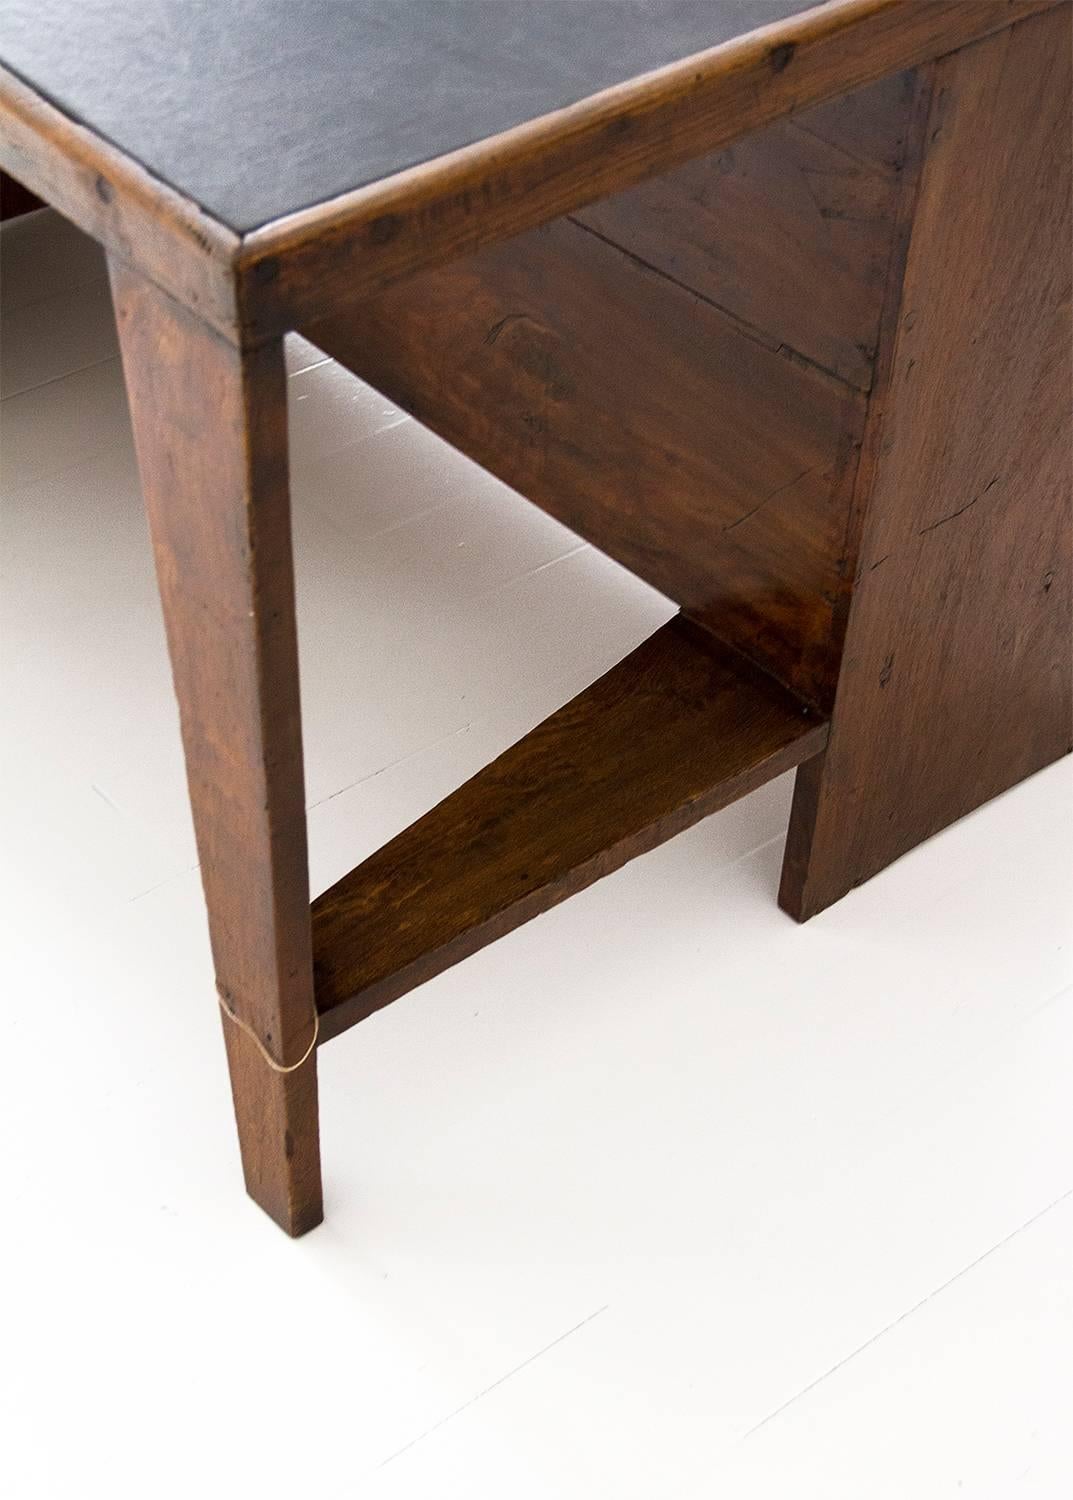 Indian Pierre Jeanneret Office Desk for Chandigarh, Wood and Leather, circa 1950, India